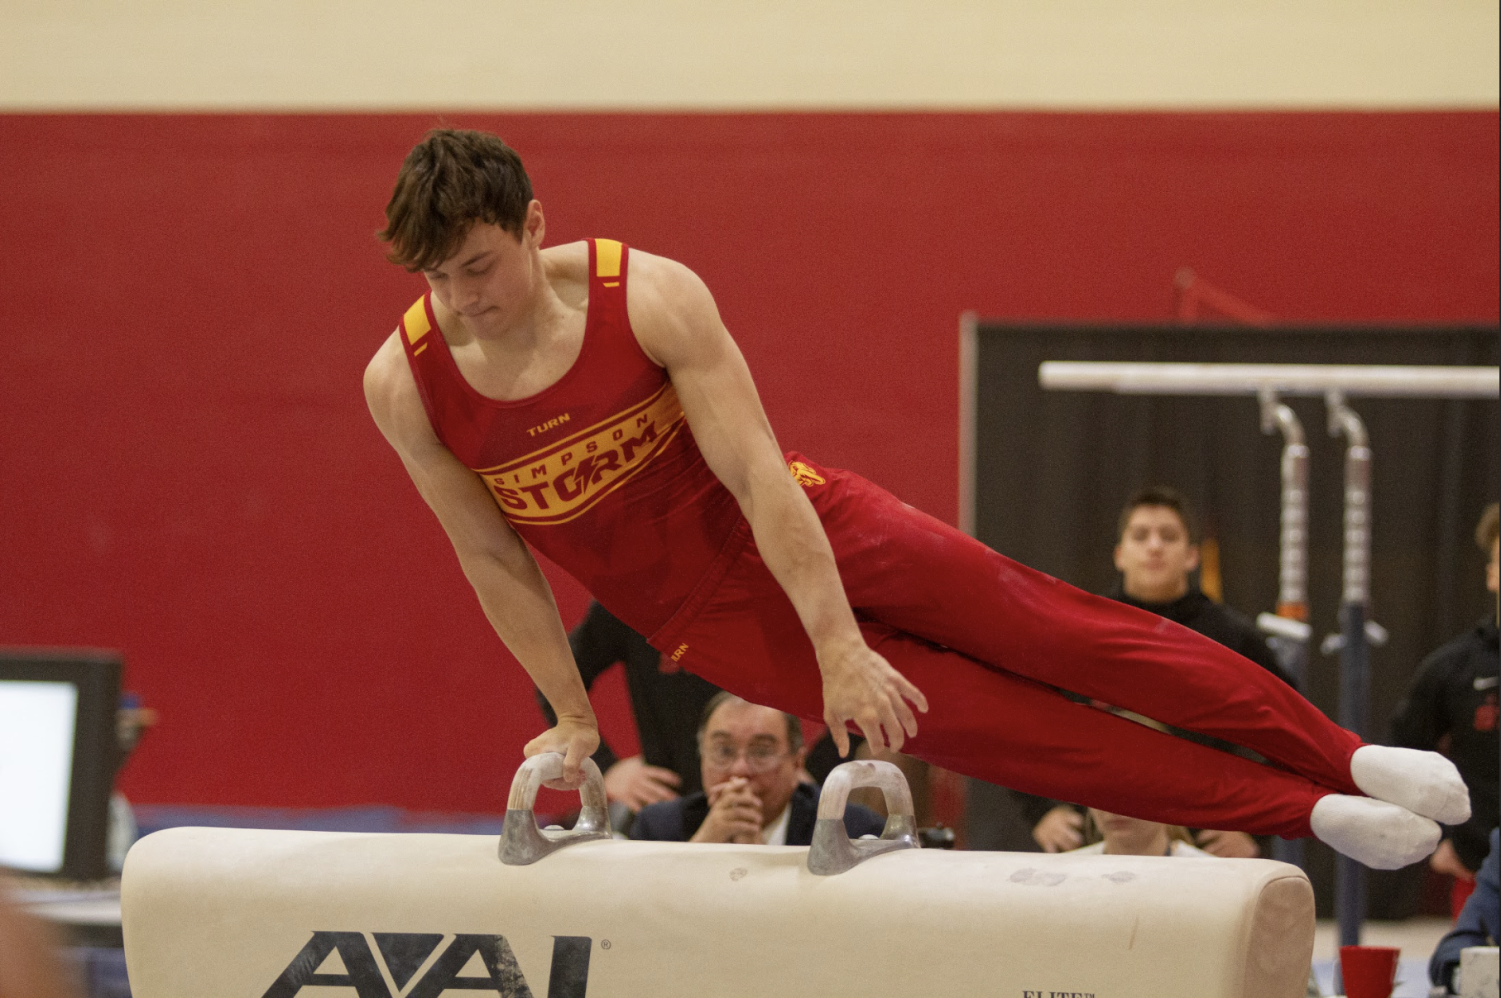 Sterling Pariza set his personal best on rings at ECAC and qualified for all-around at the NCAA Championships.
